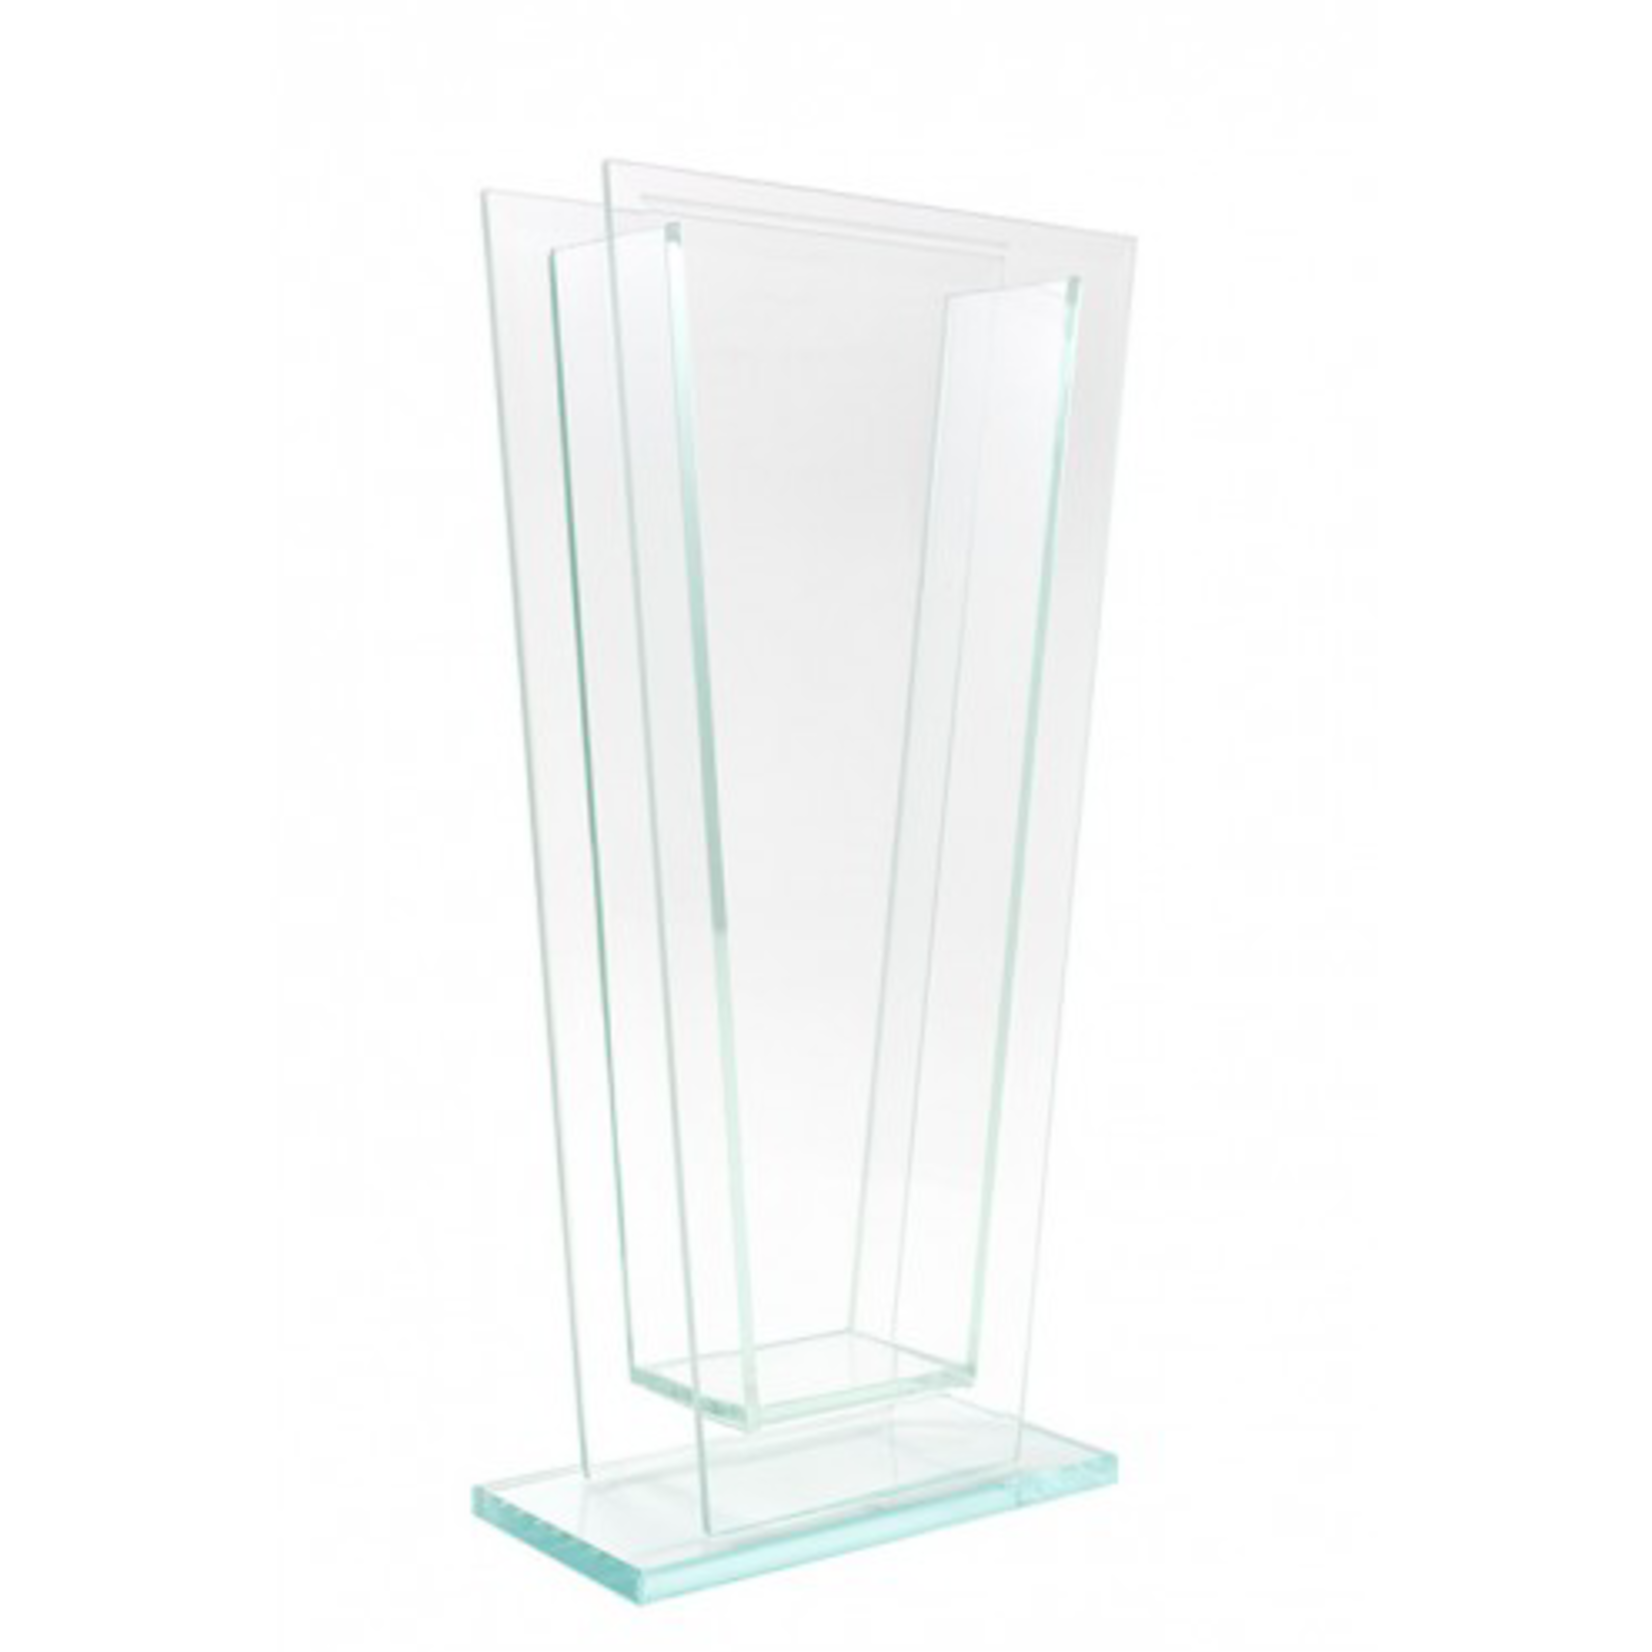 12”H X 2” X 5” TAPERED PLATE GLASS